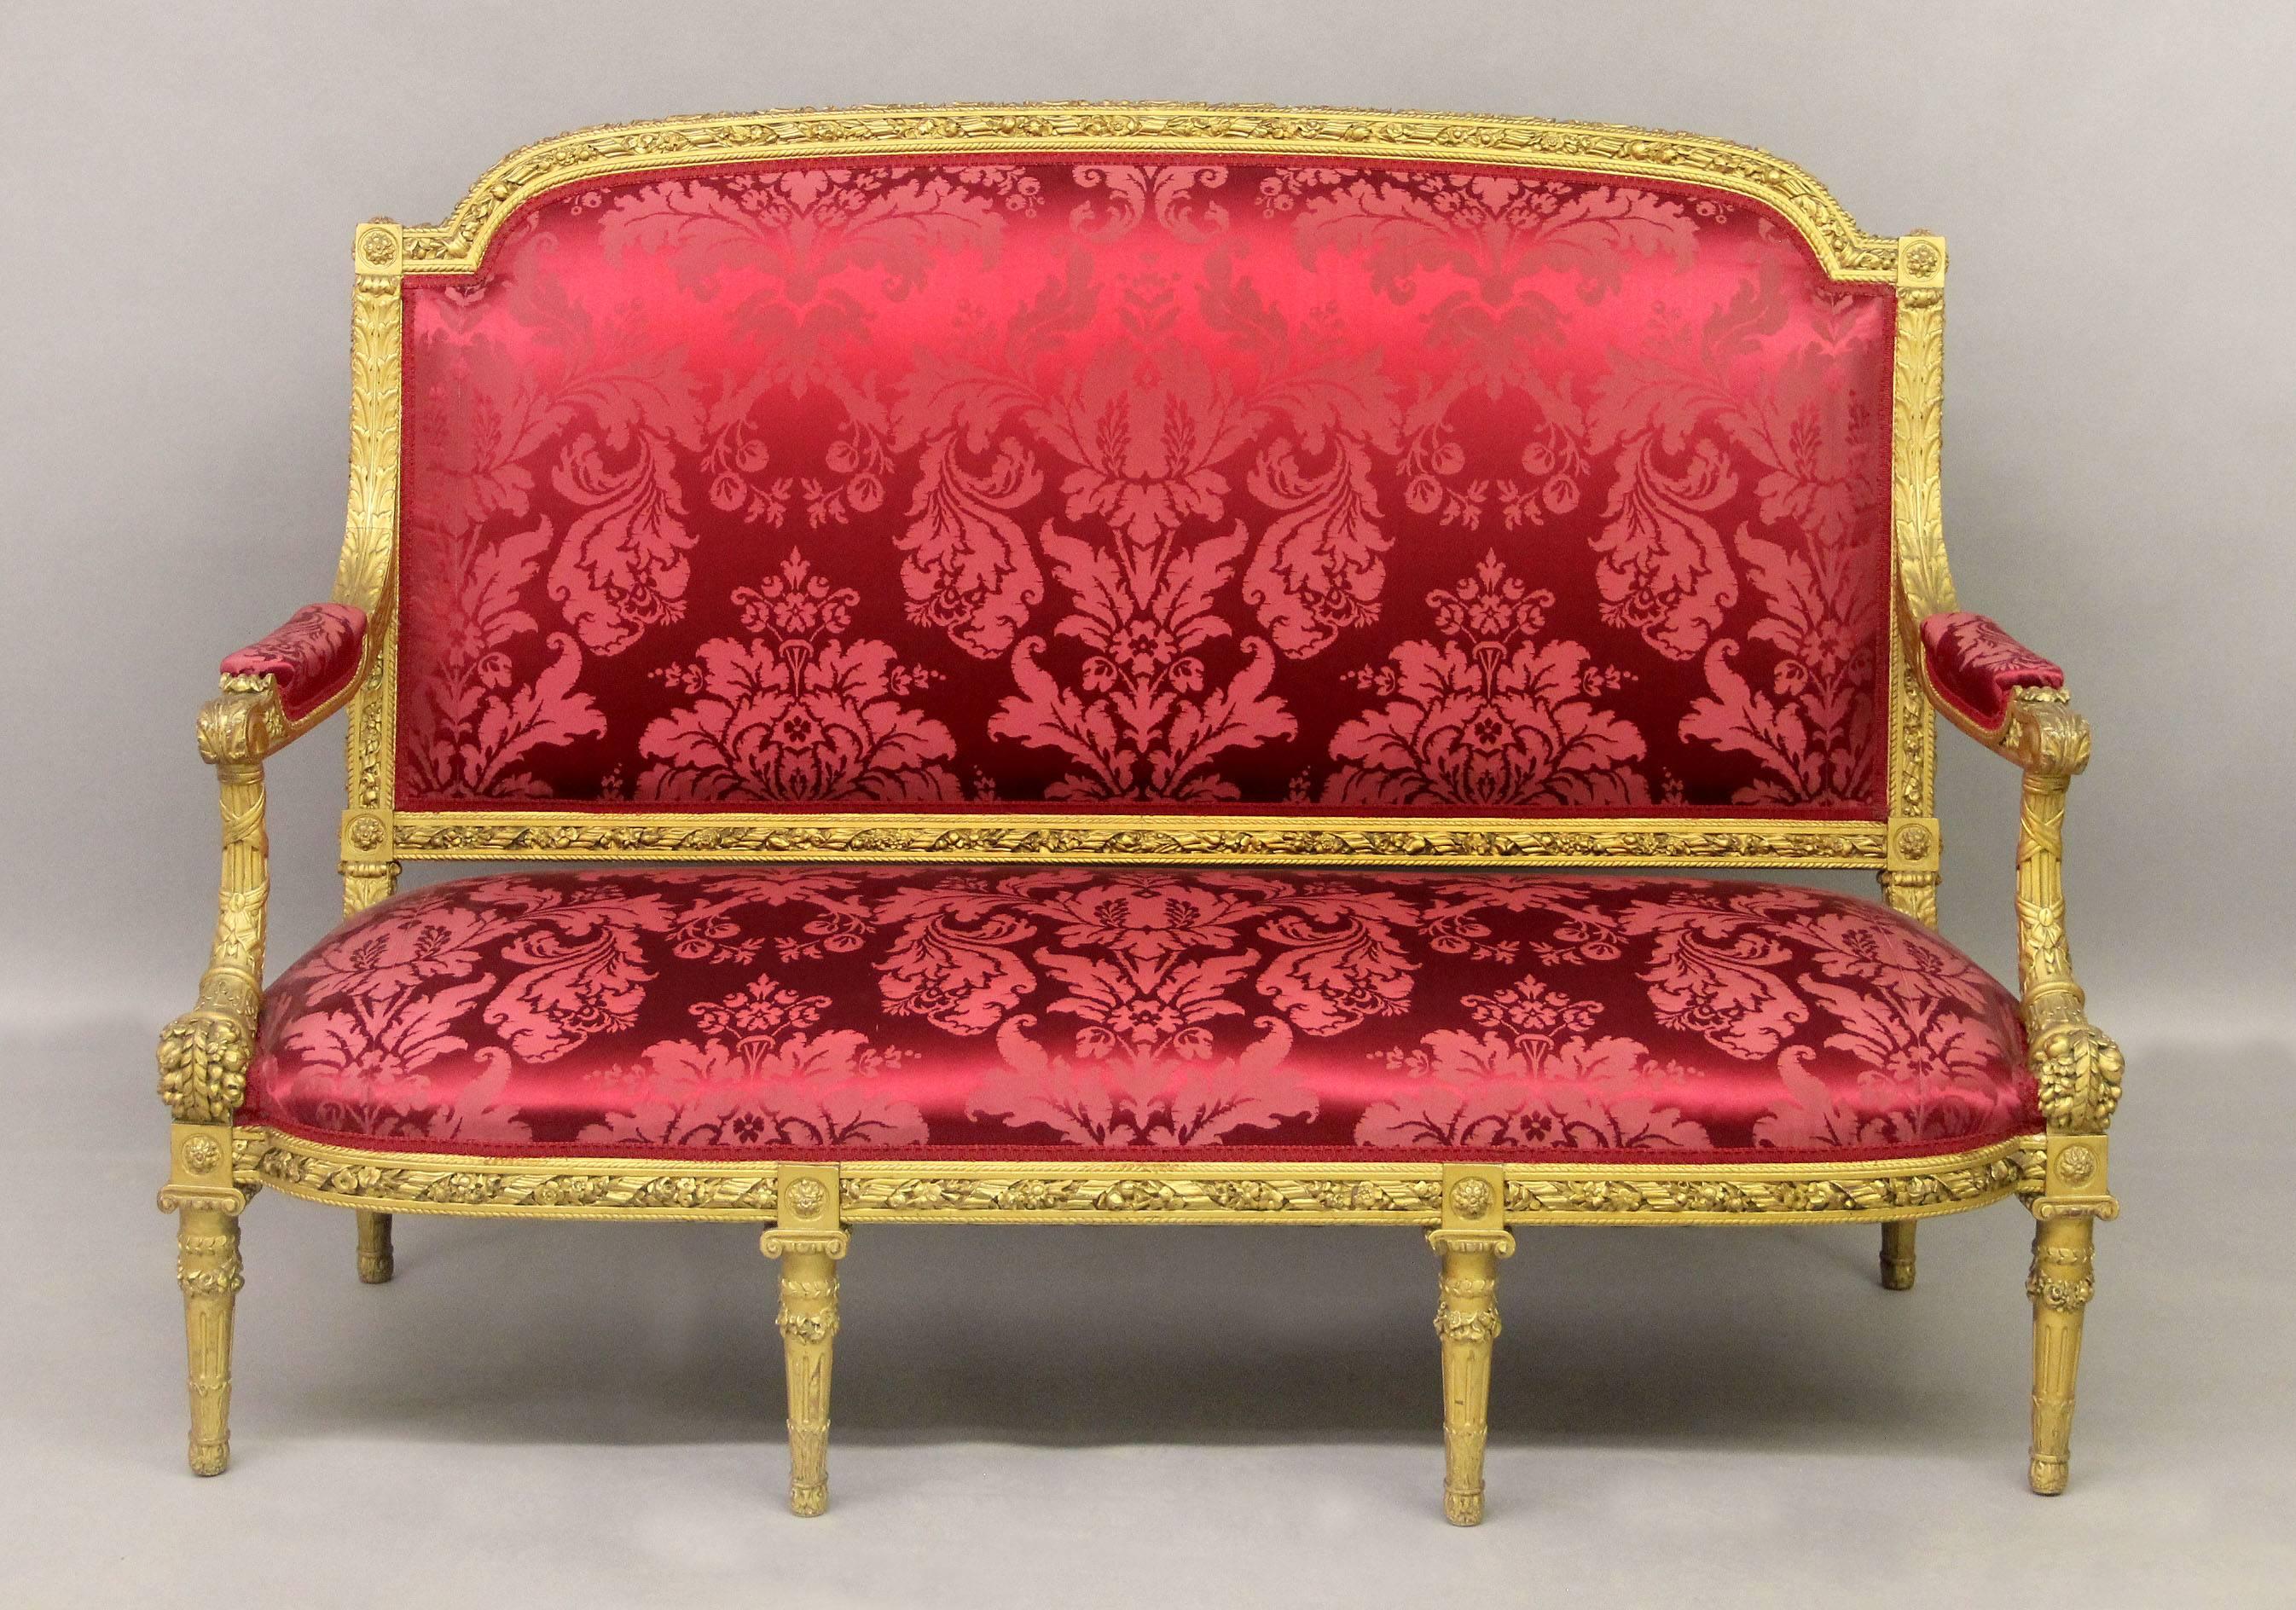 A Palatial late 19th century seven piece Louis XVI style giltwood carved parlor set

The fantastic and heavily carved set consists of four arm chairs, two side chairs and a settee, each with wonderful floral and rope carved frames, cornucopia